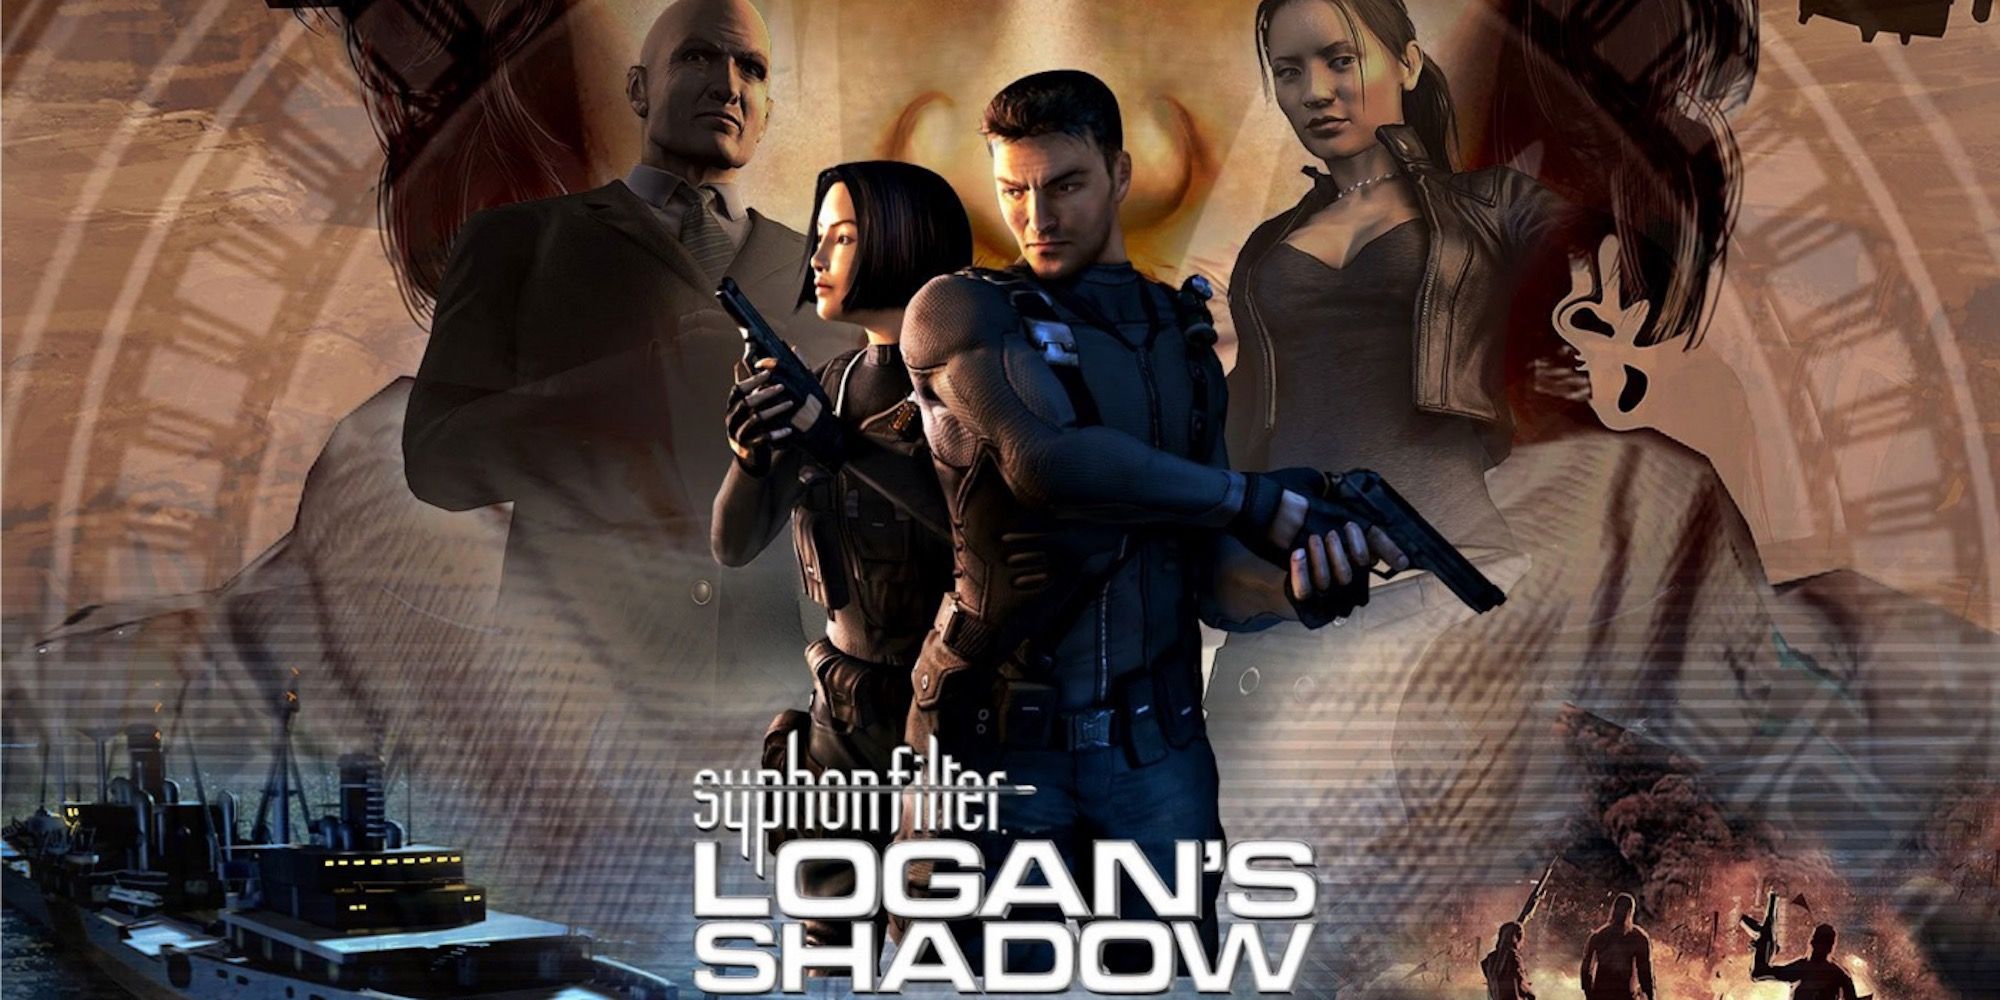 Promo art featuring characters in Syphon Filter Logan’s Shadow